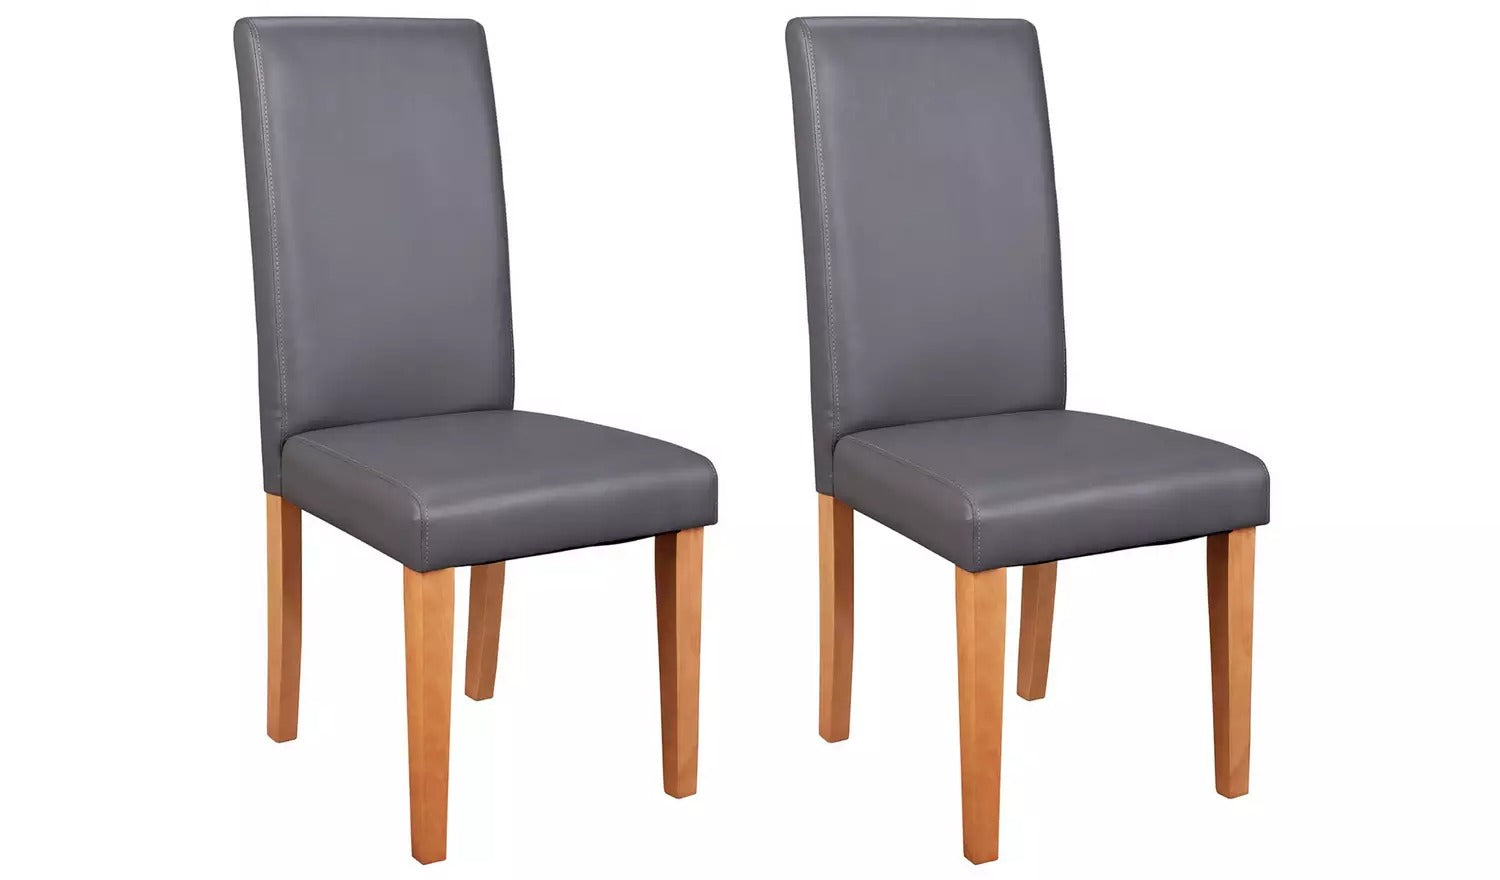 Home Pair of Midback Dining Chairs - Charcoal